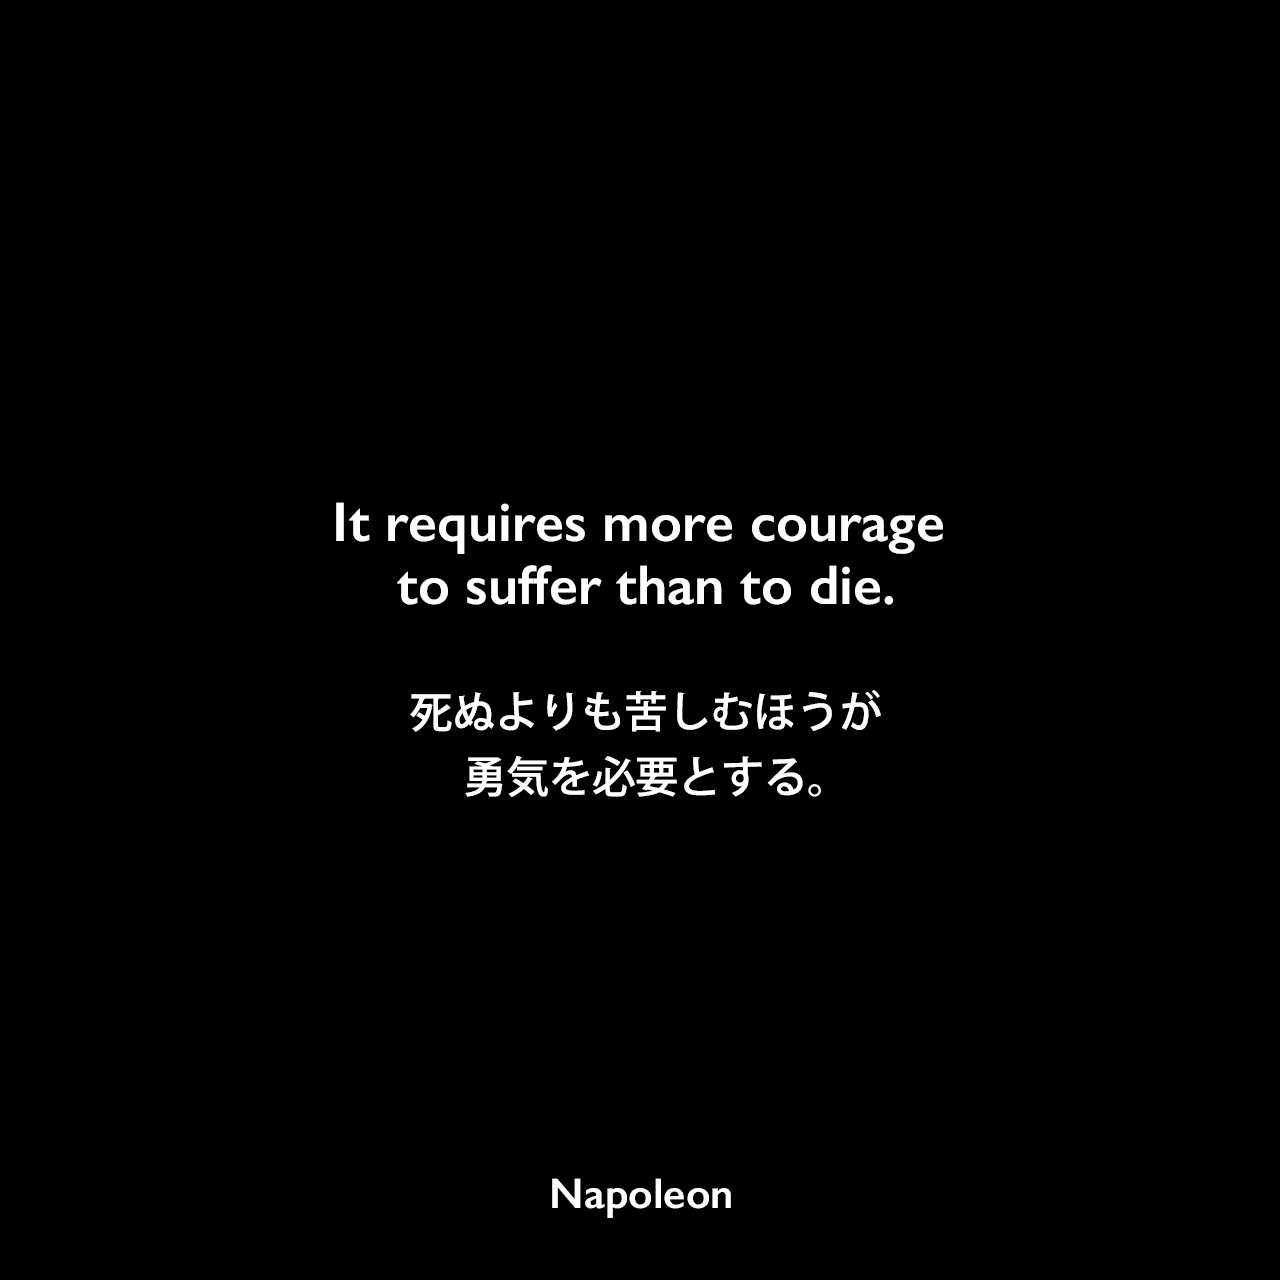 It requires more courage to suffer than to die.死ぬよりも苦しむほうが勇気を必要とする。Napoleon